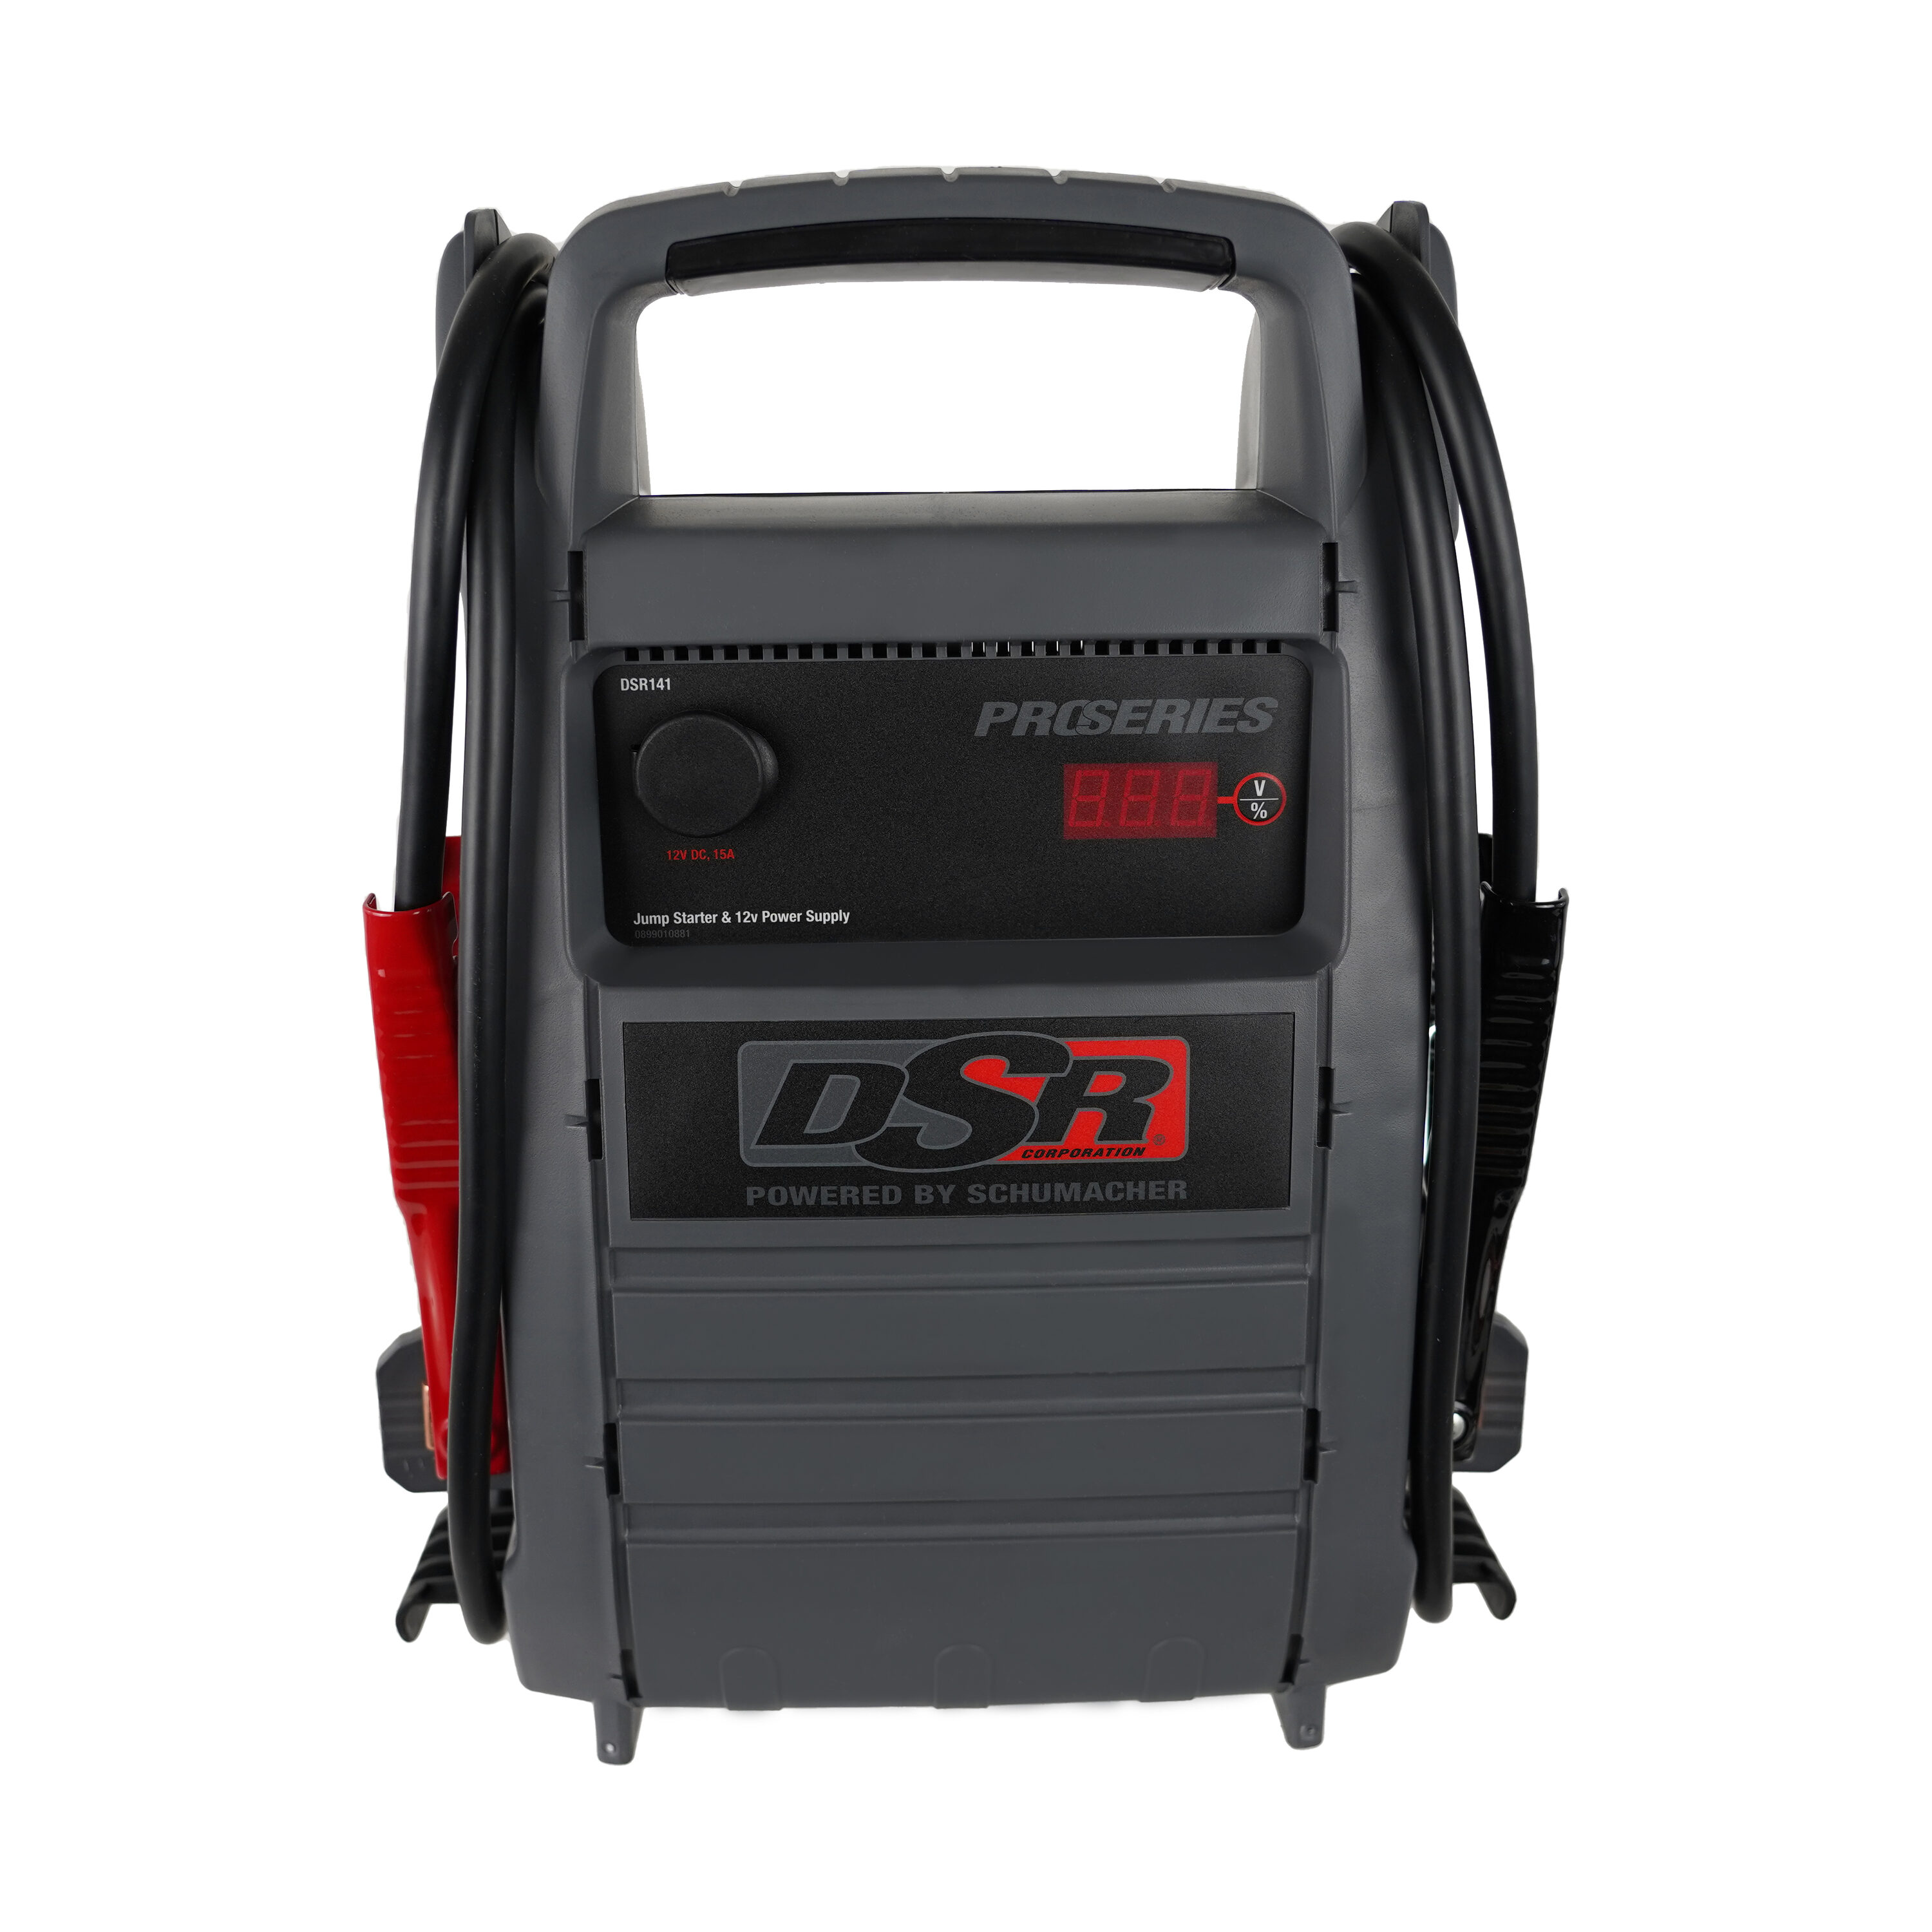 Schumacher Electric Car Battery Jump Starters at Lowes.com